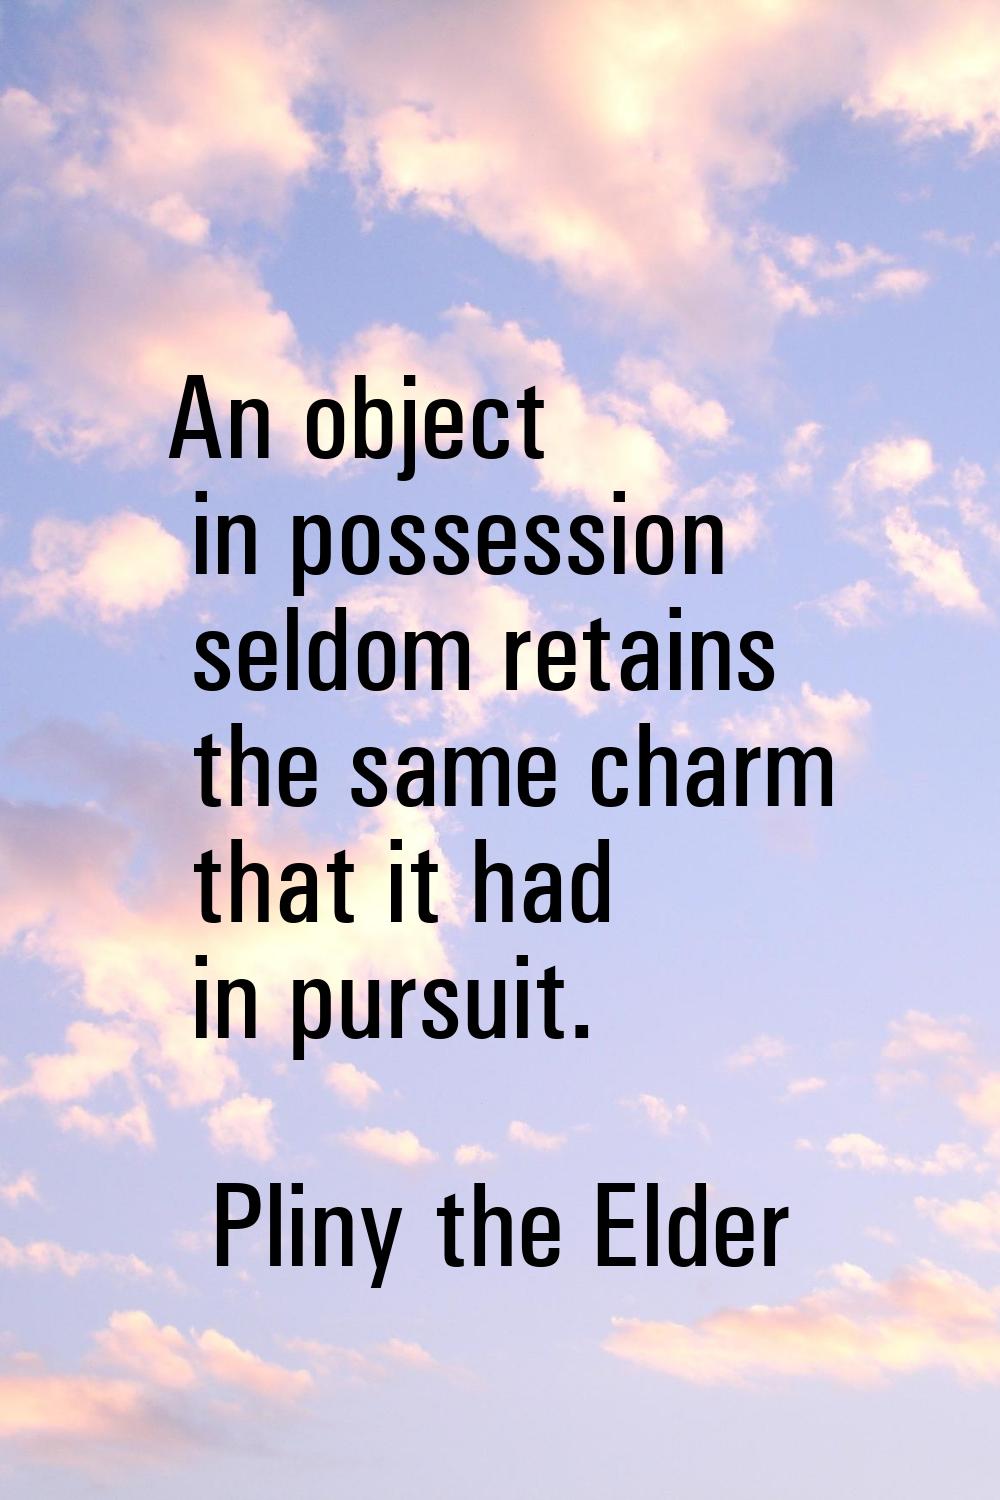 An object in possession seldom retains the same charm that it had in pursuit.